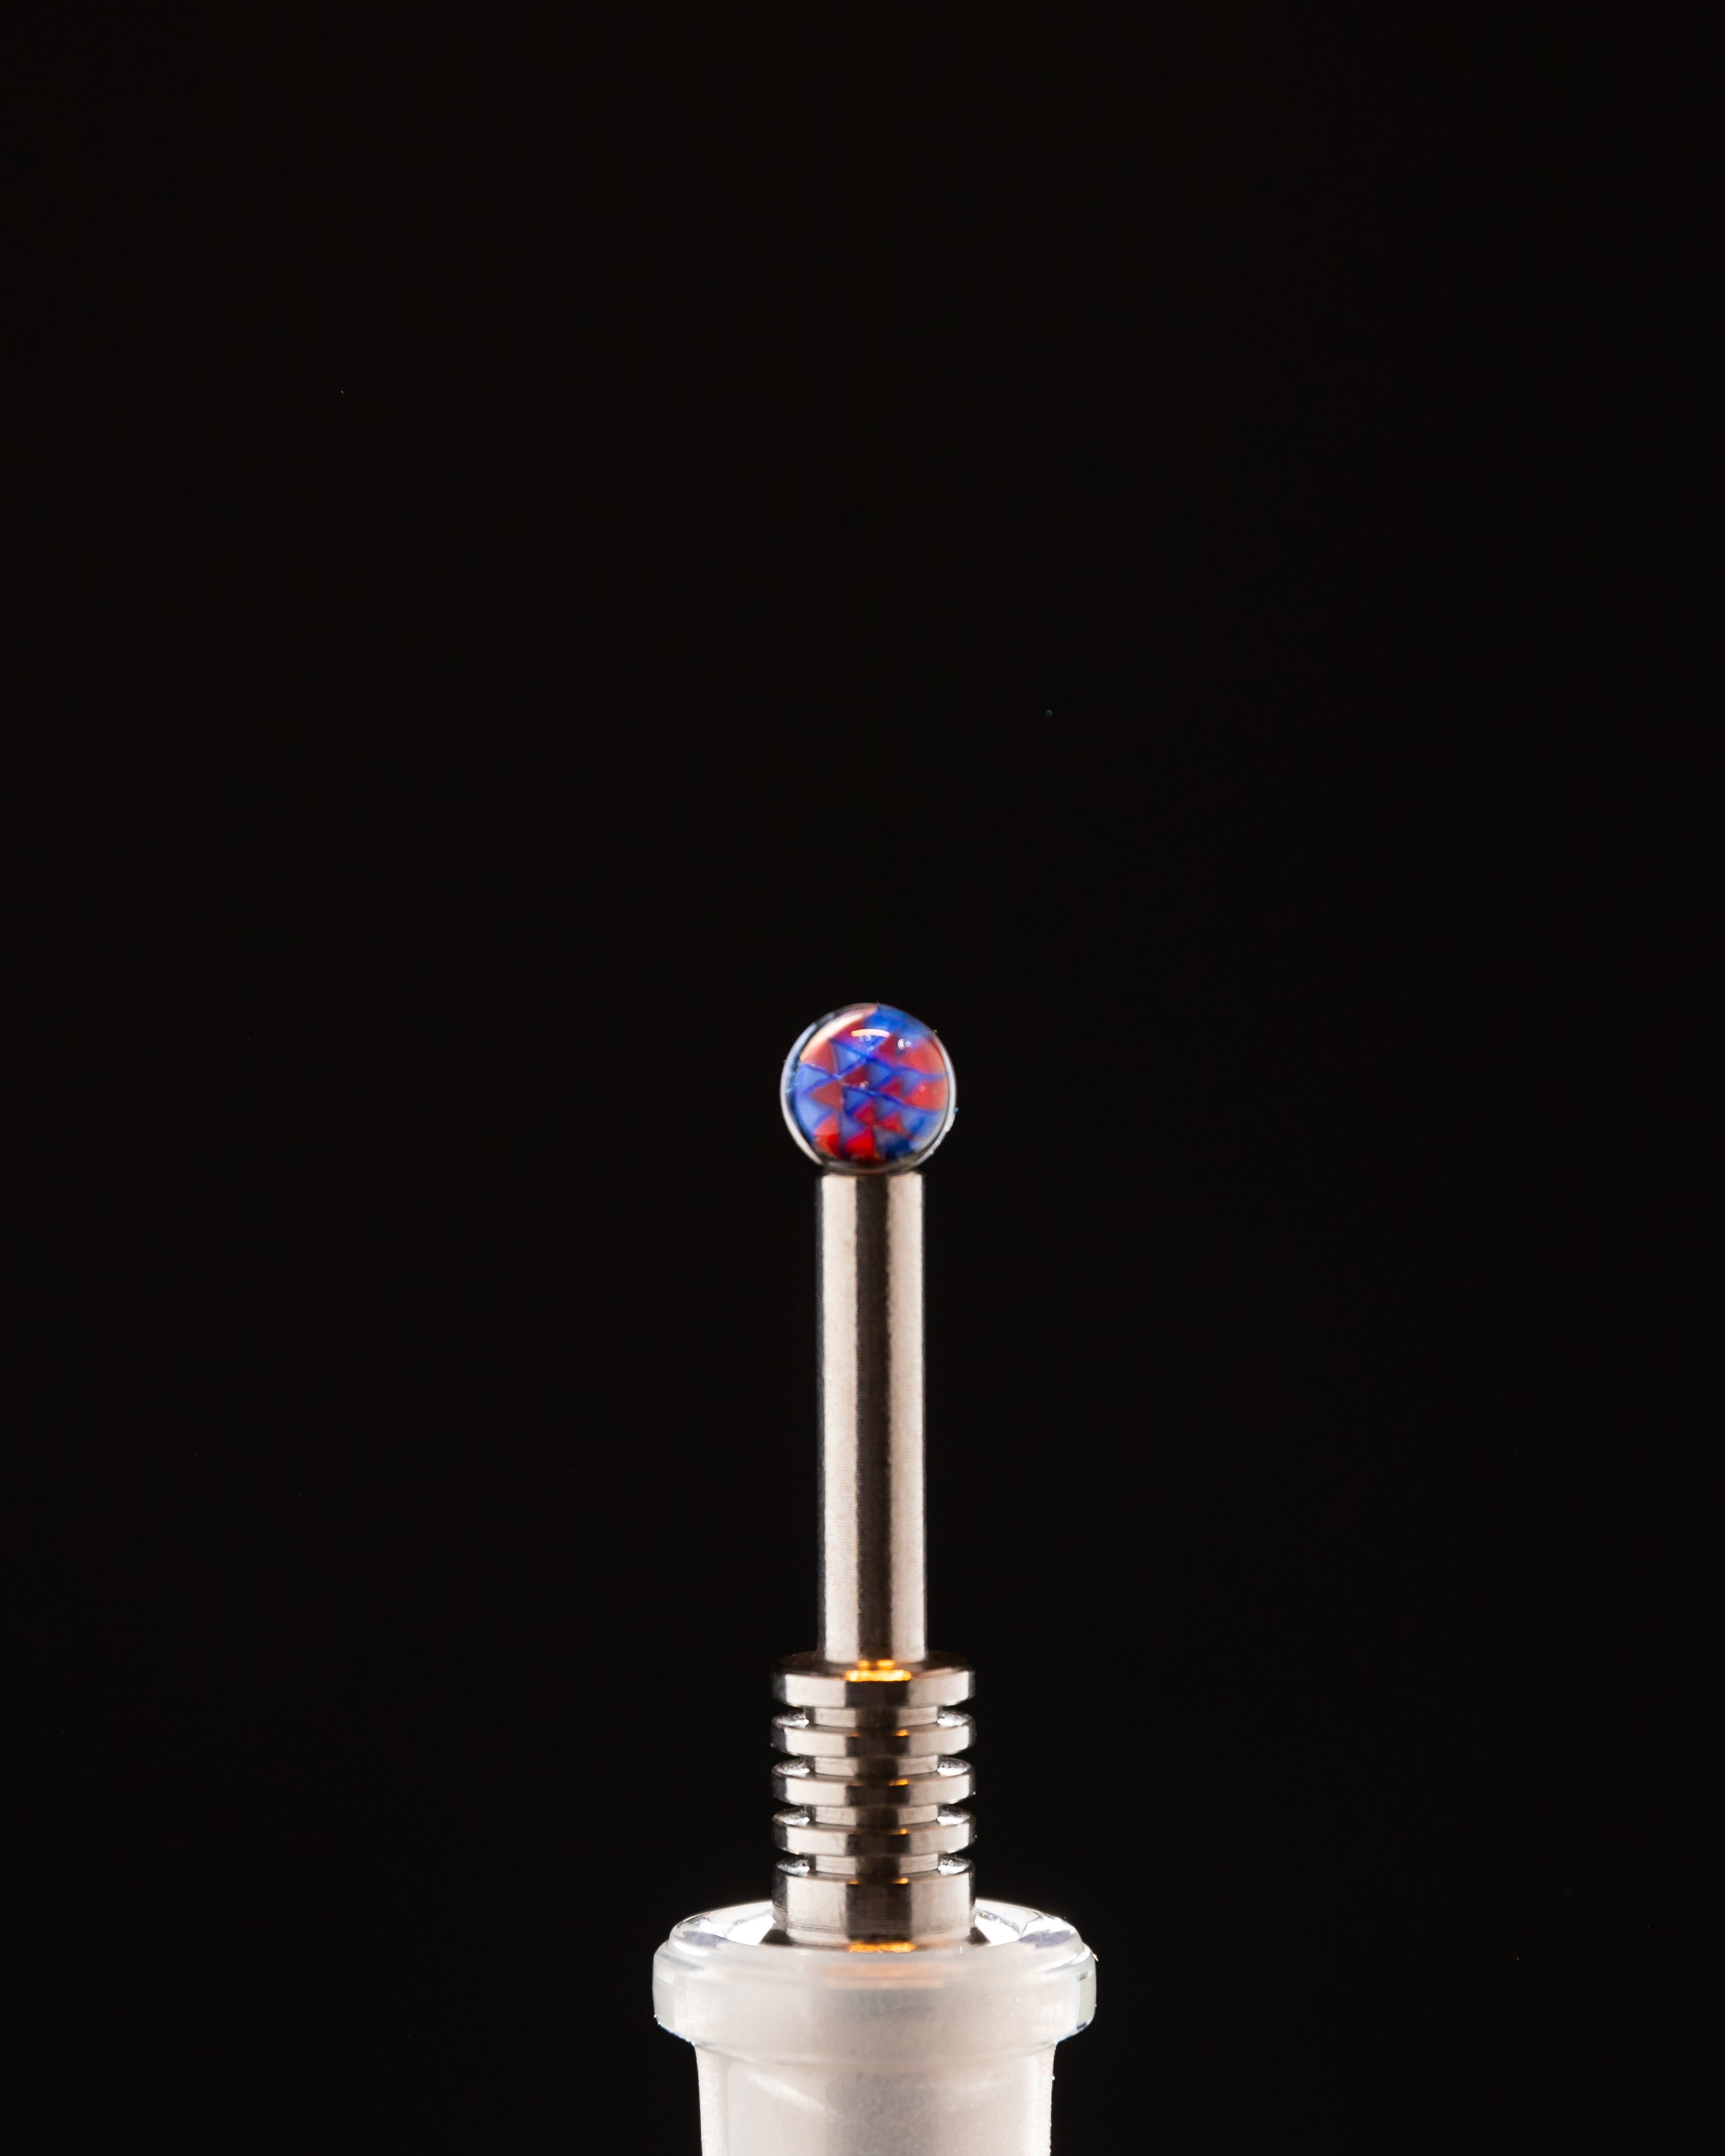 Steve Hulsebos Glass - Milli Terp Pearl 6mm (Blue and Red Triangles)